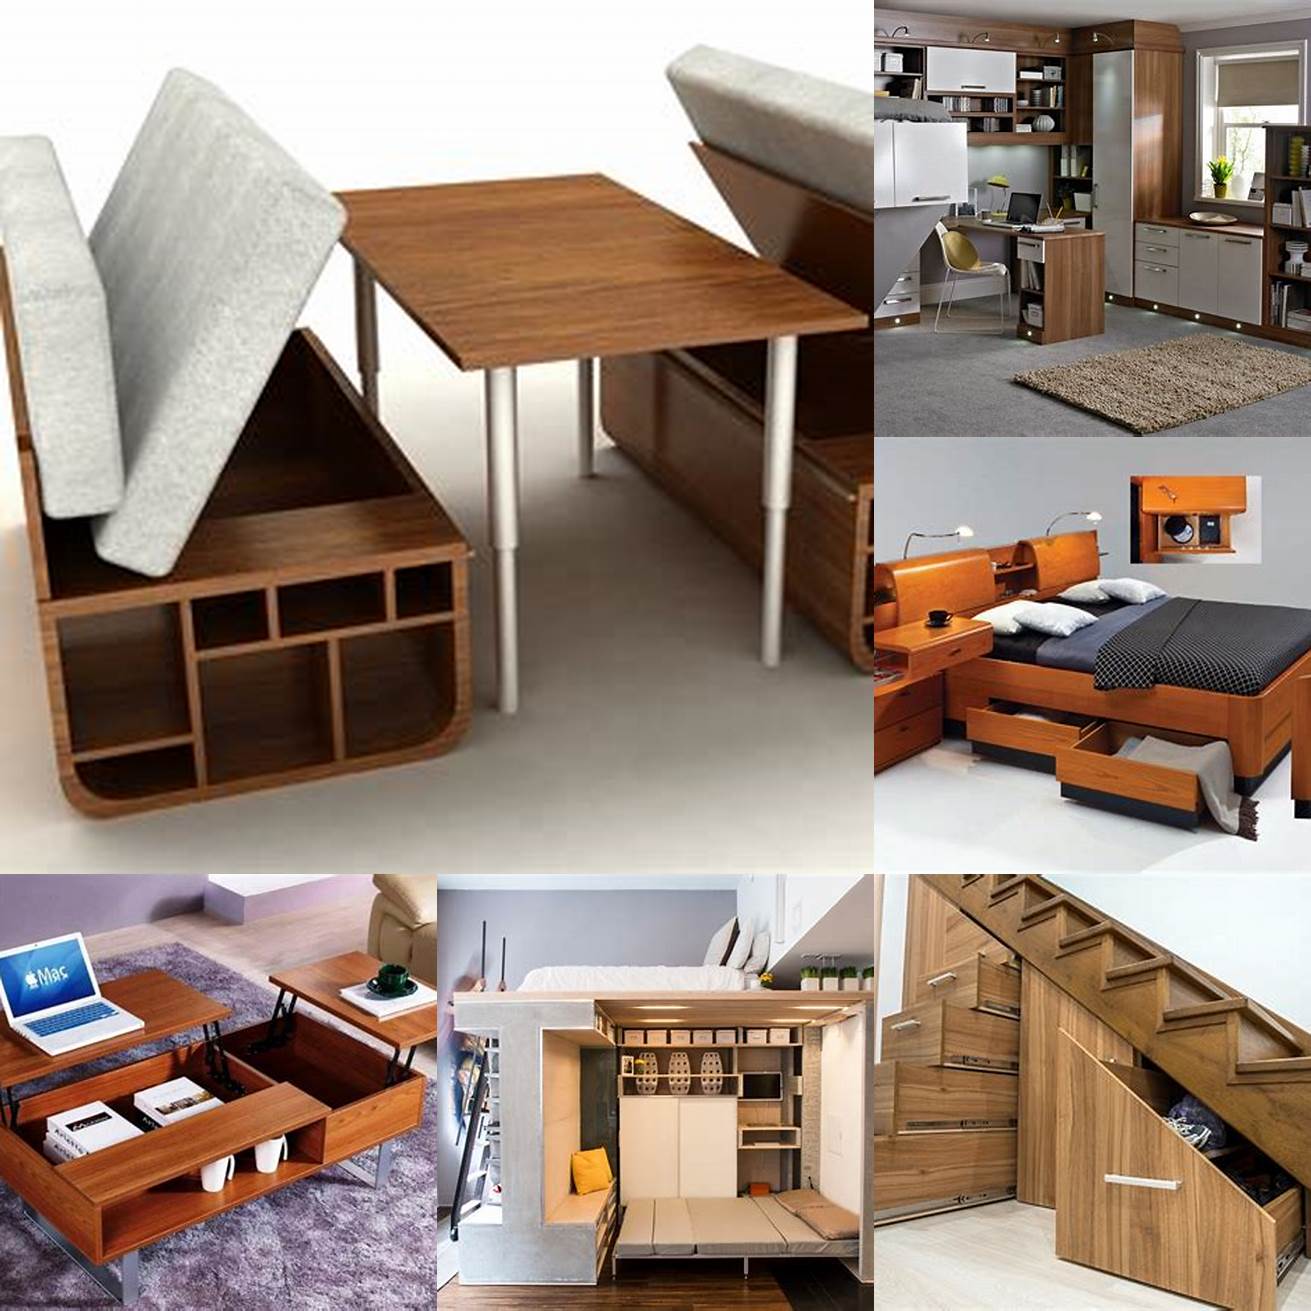 Invest in multi-functional furniture to maximize storage options